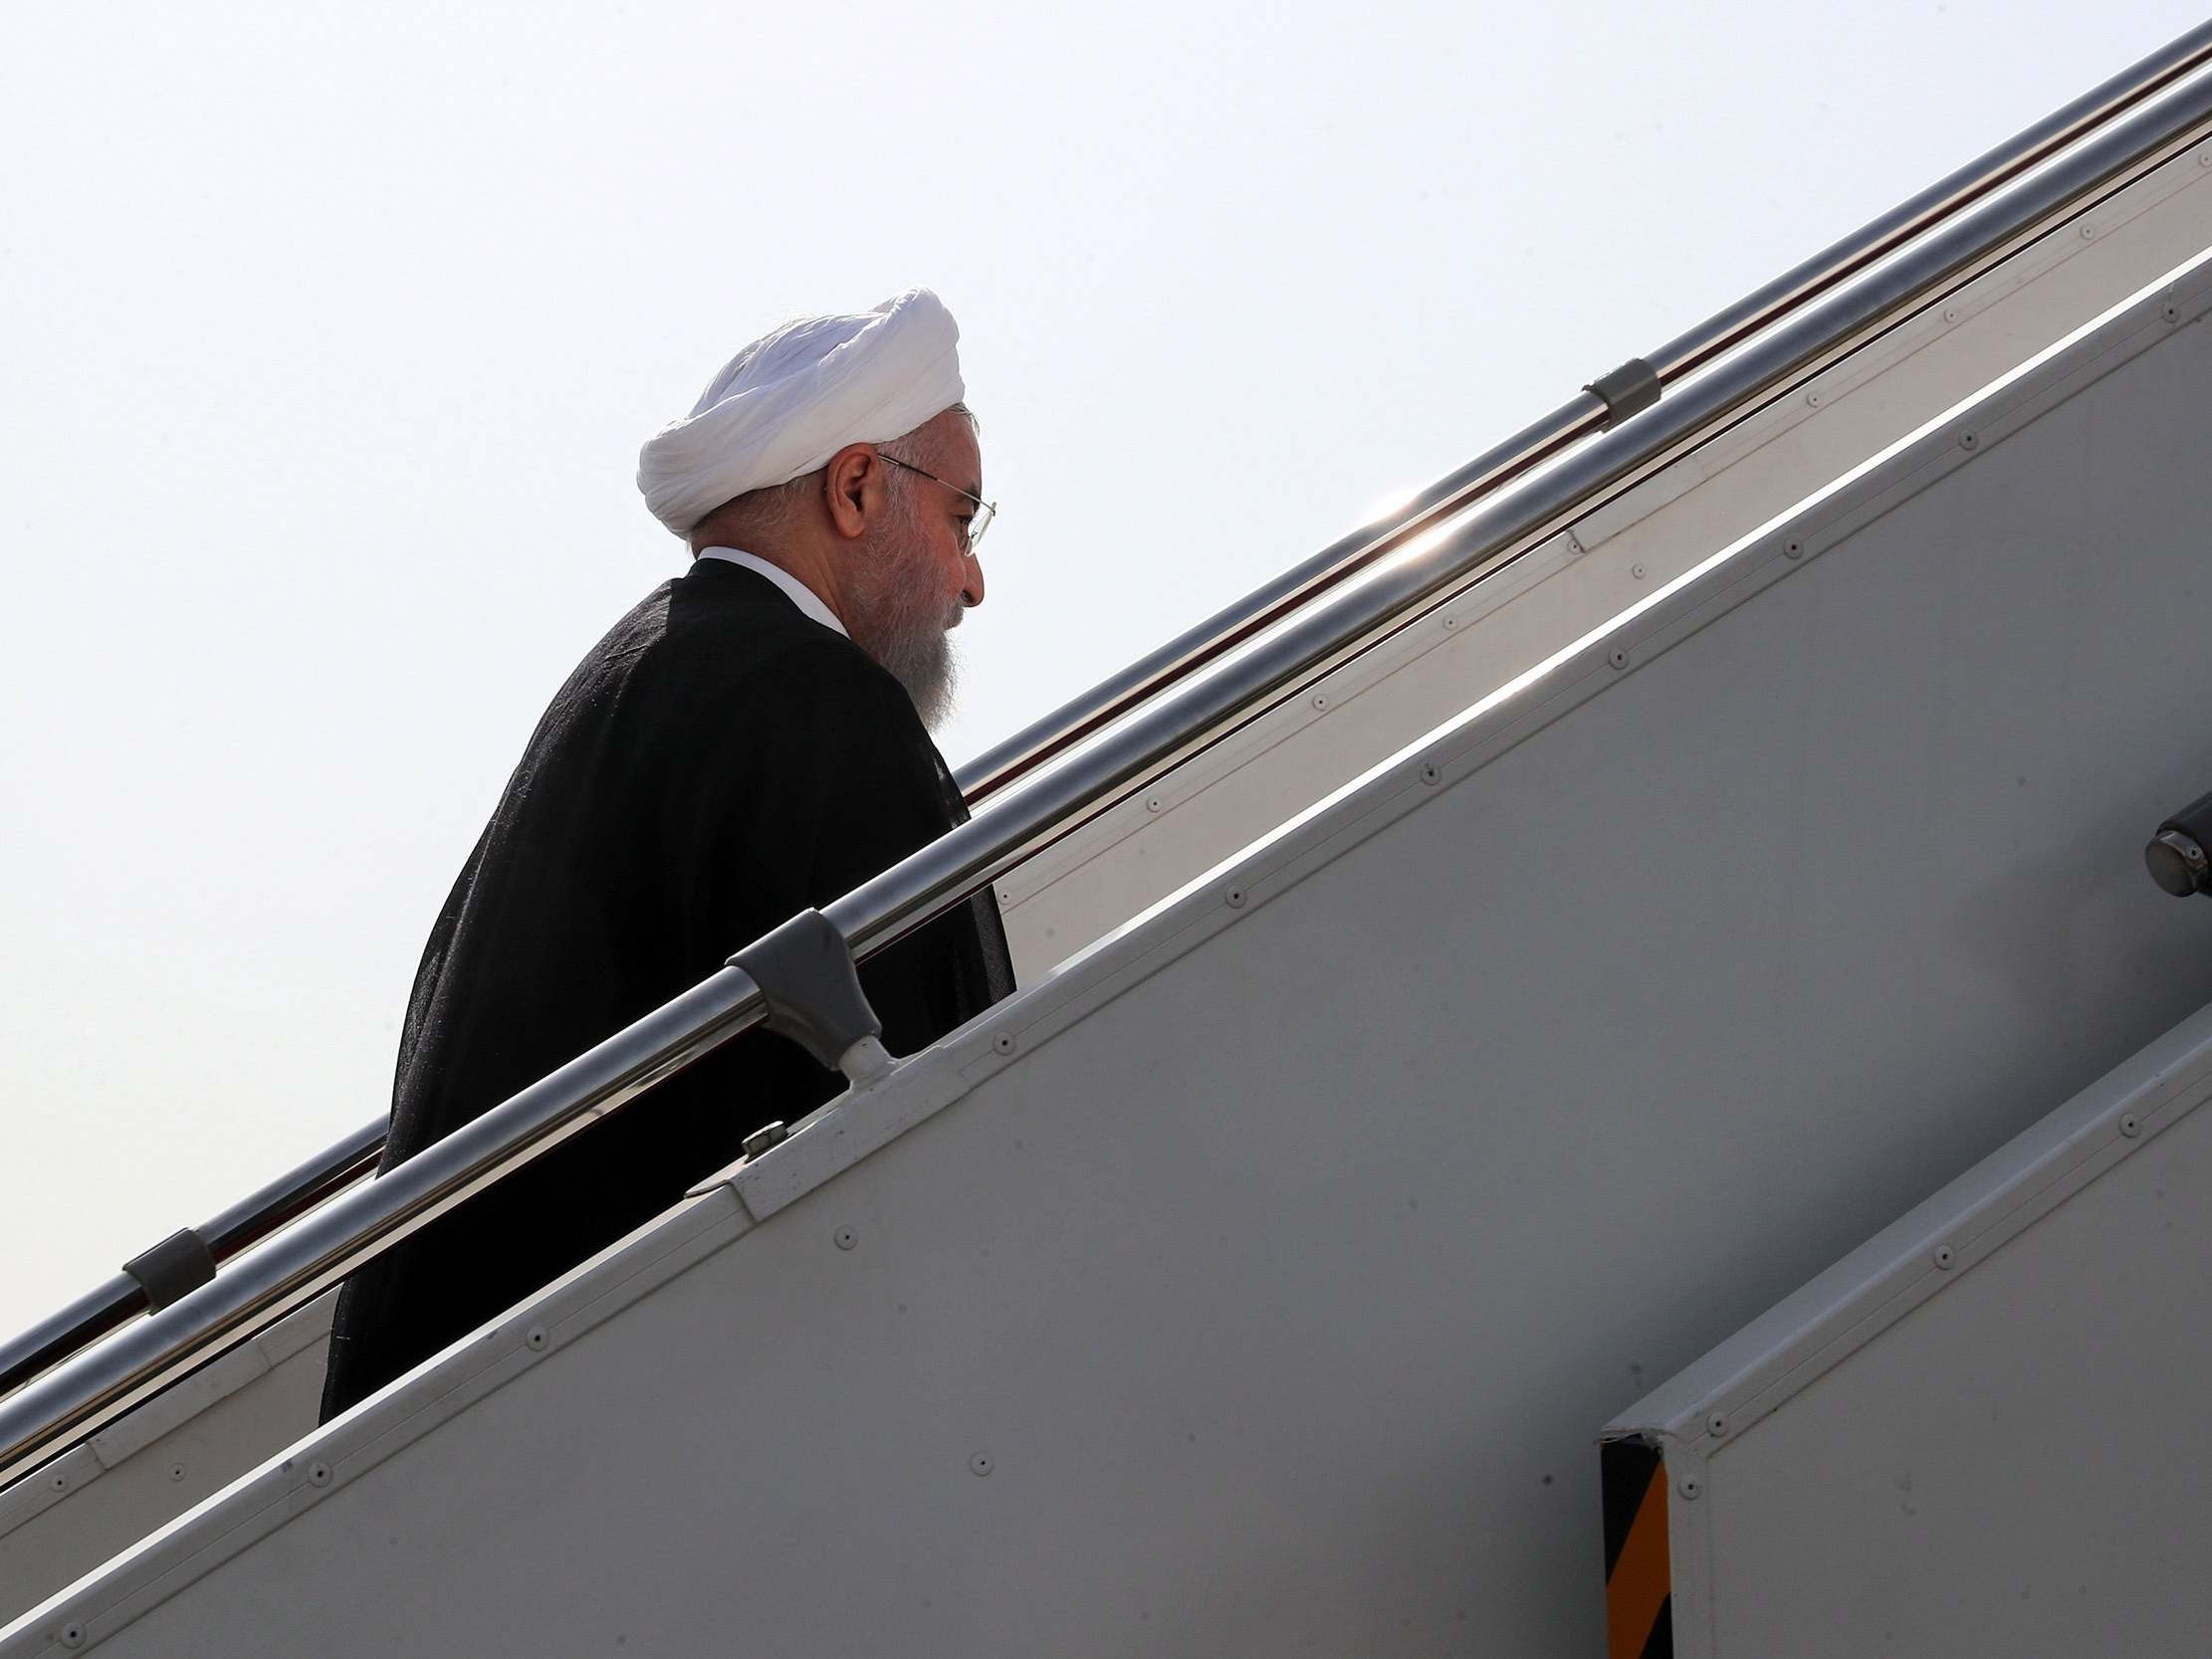 Iranian president Hassan Rouhani boards a plane bound for New York and the UN General Assembly session